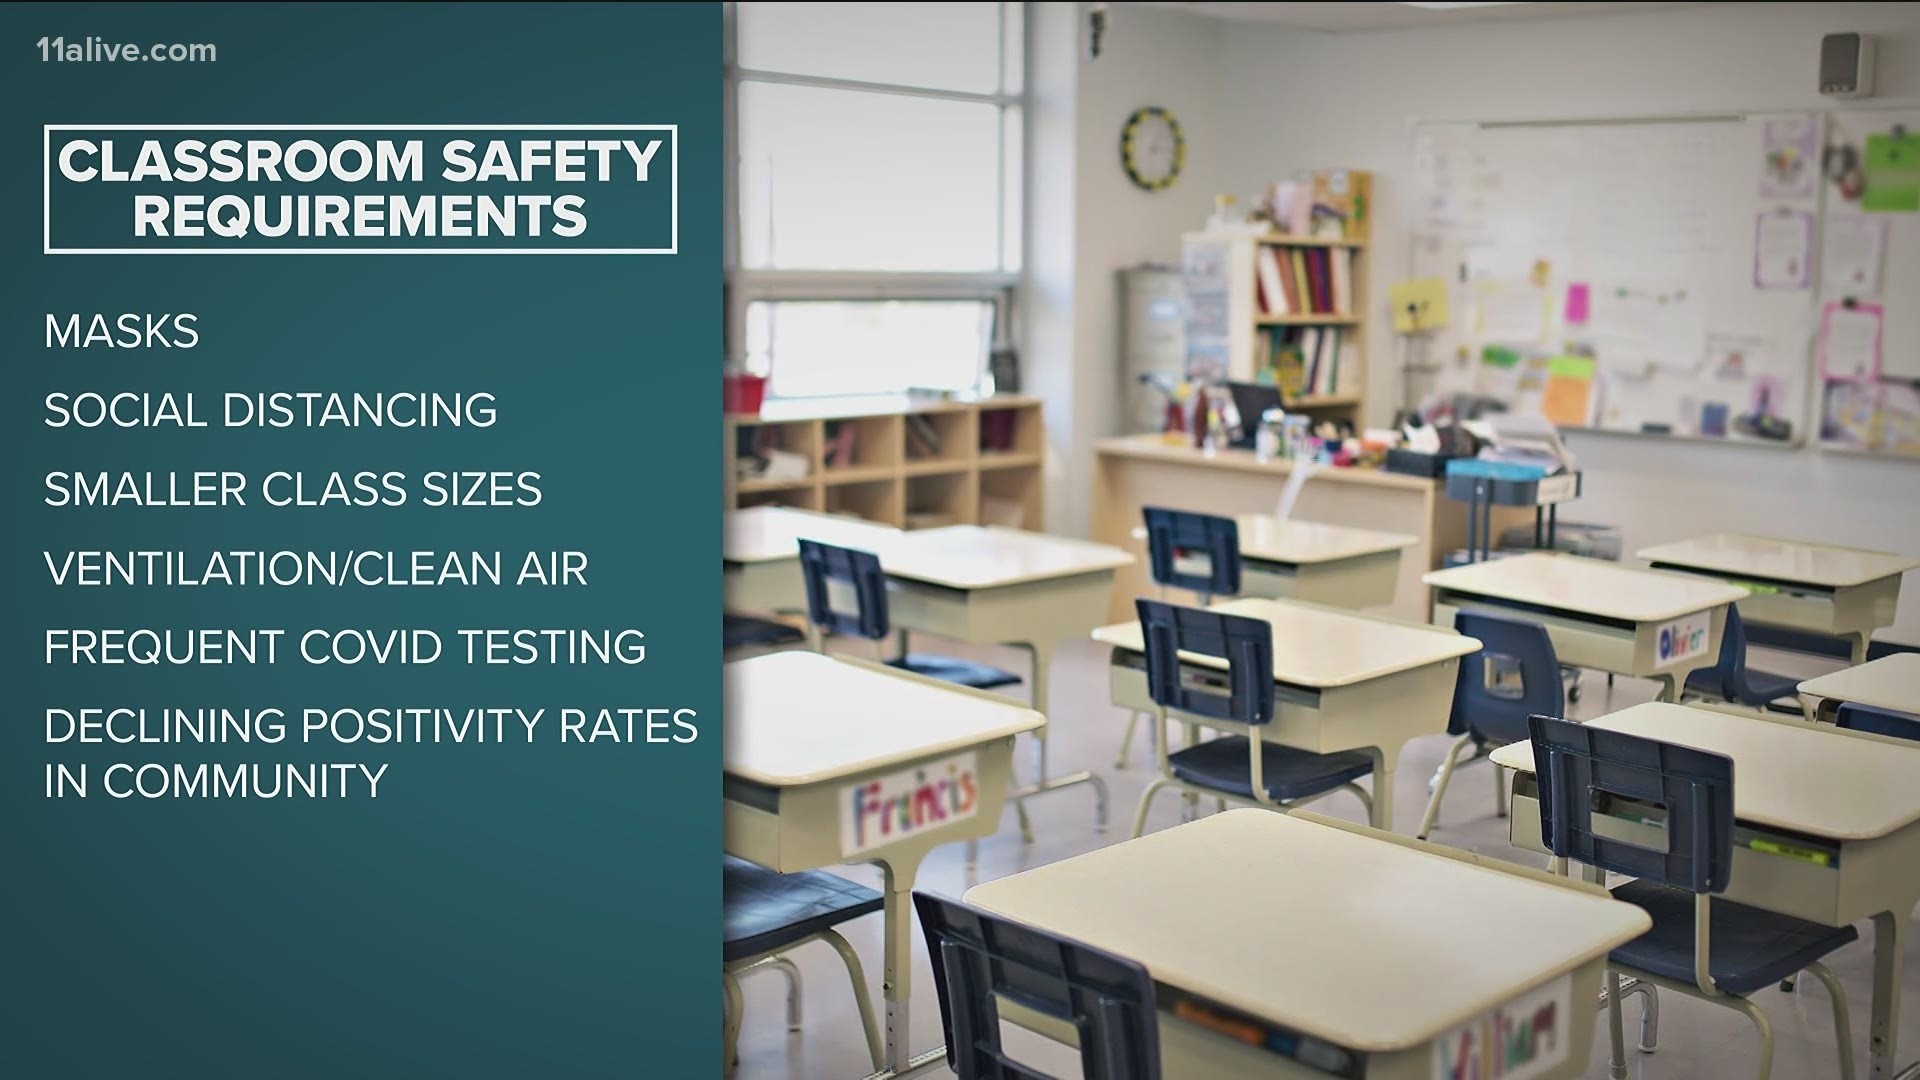 Georgia teachers are urging schools to strictly enforce all classroom safety precautions while they wait their turns for the vaccines.